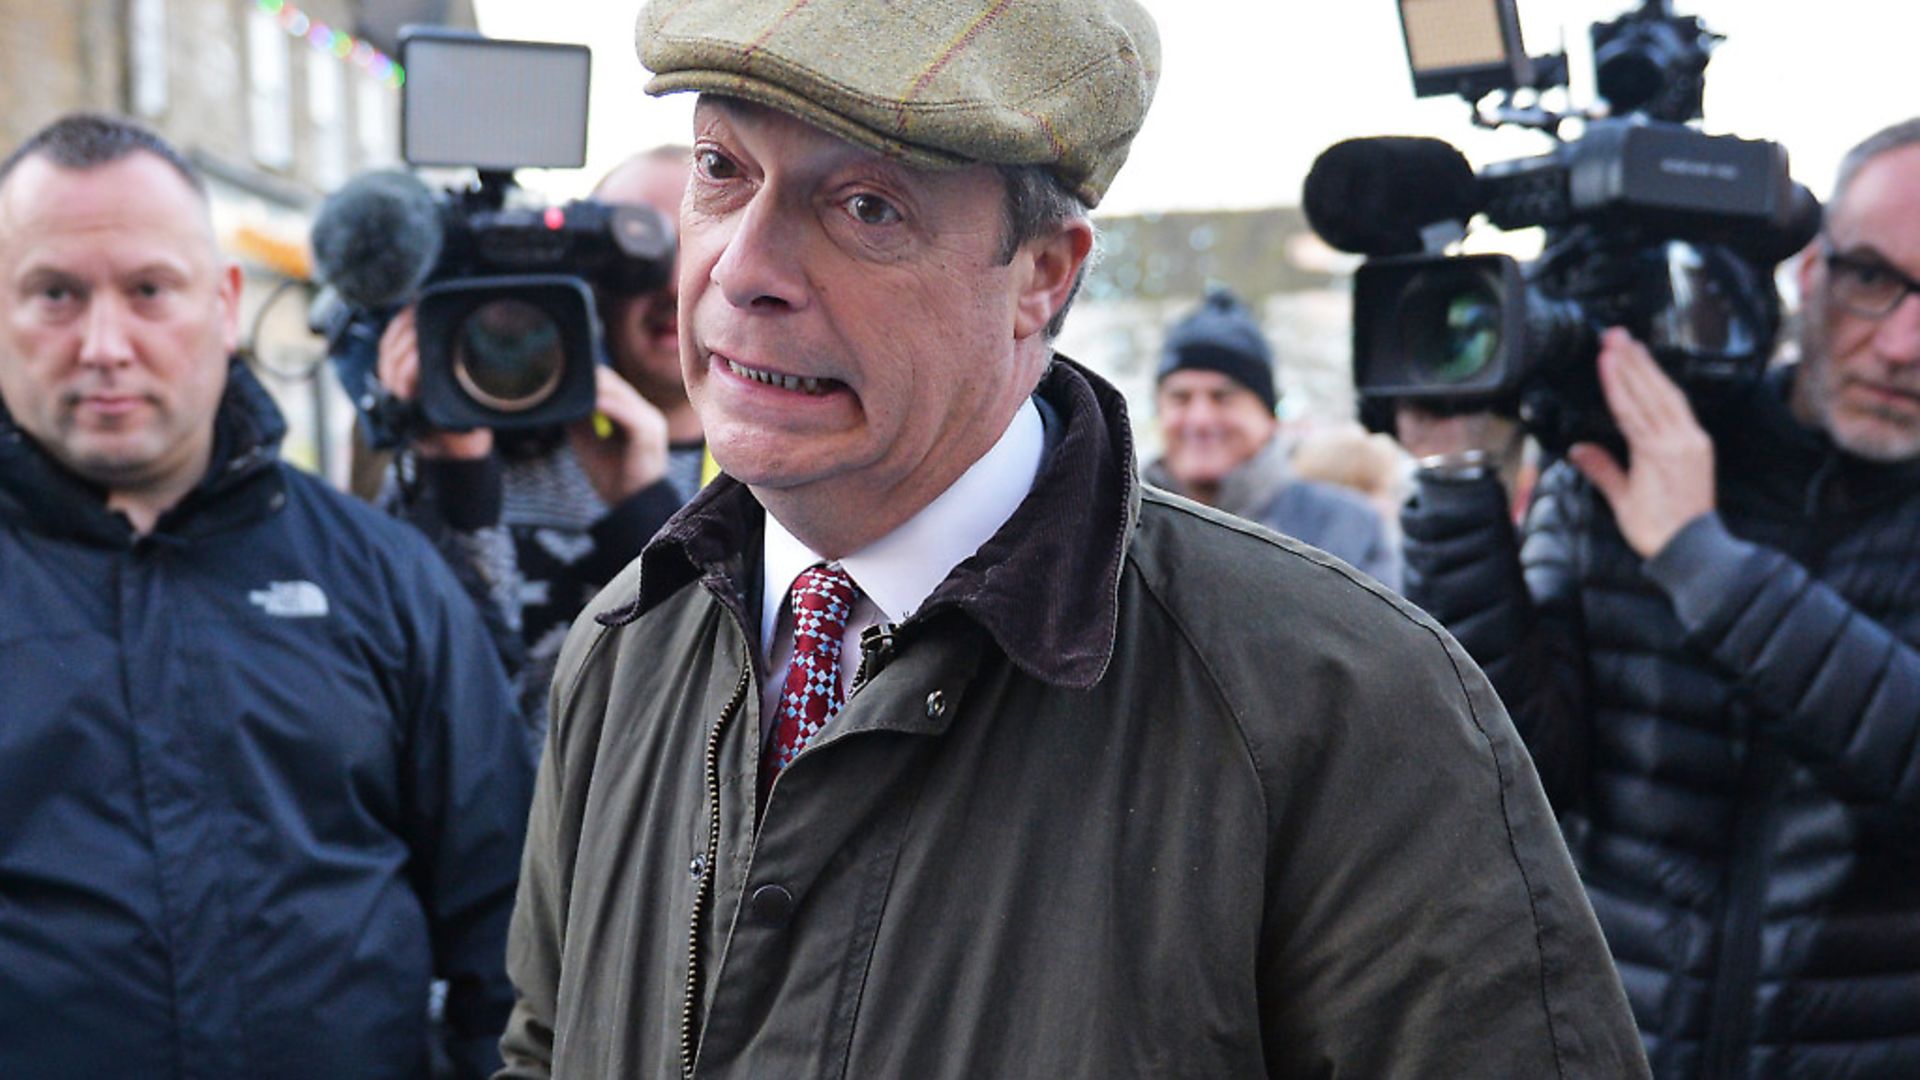 Nigel Farage has been snubbed by members of his own party, as four Brexit Party MEPs are set to quit the party on Thursday, with one week to go before the election. PHoto: Jacob King / PA - Credit: PA Wire/PA Images